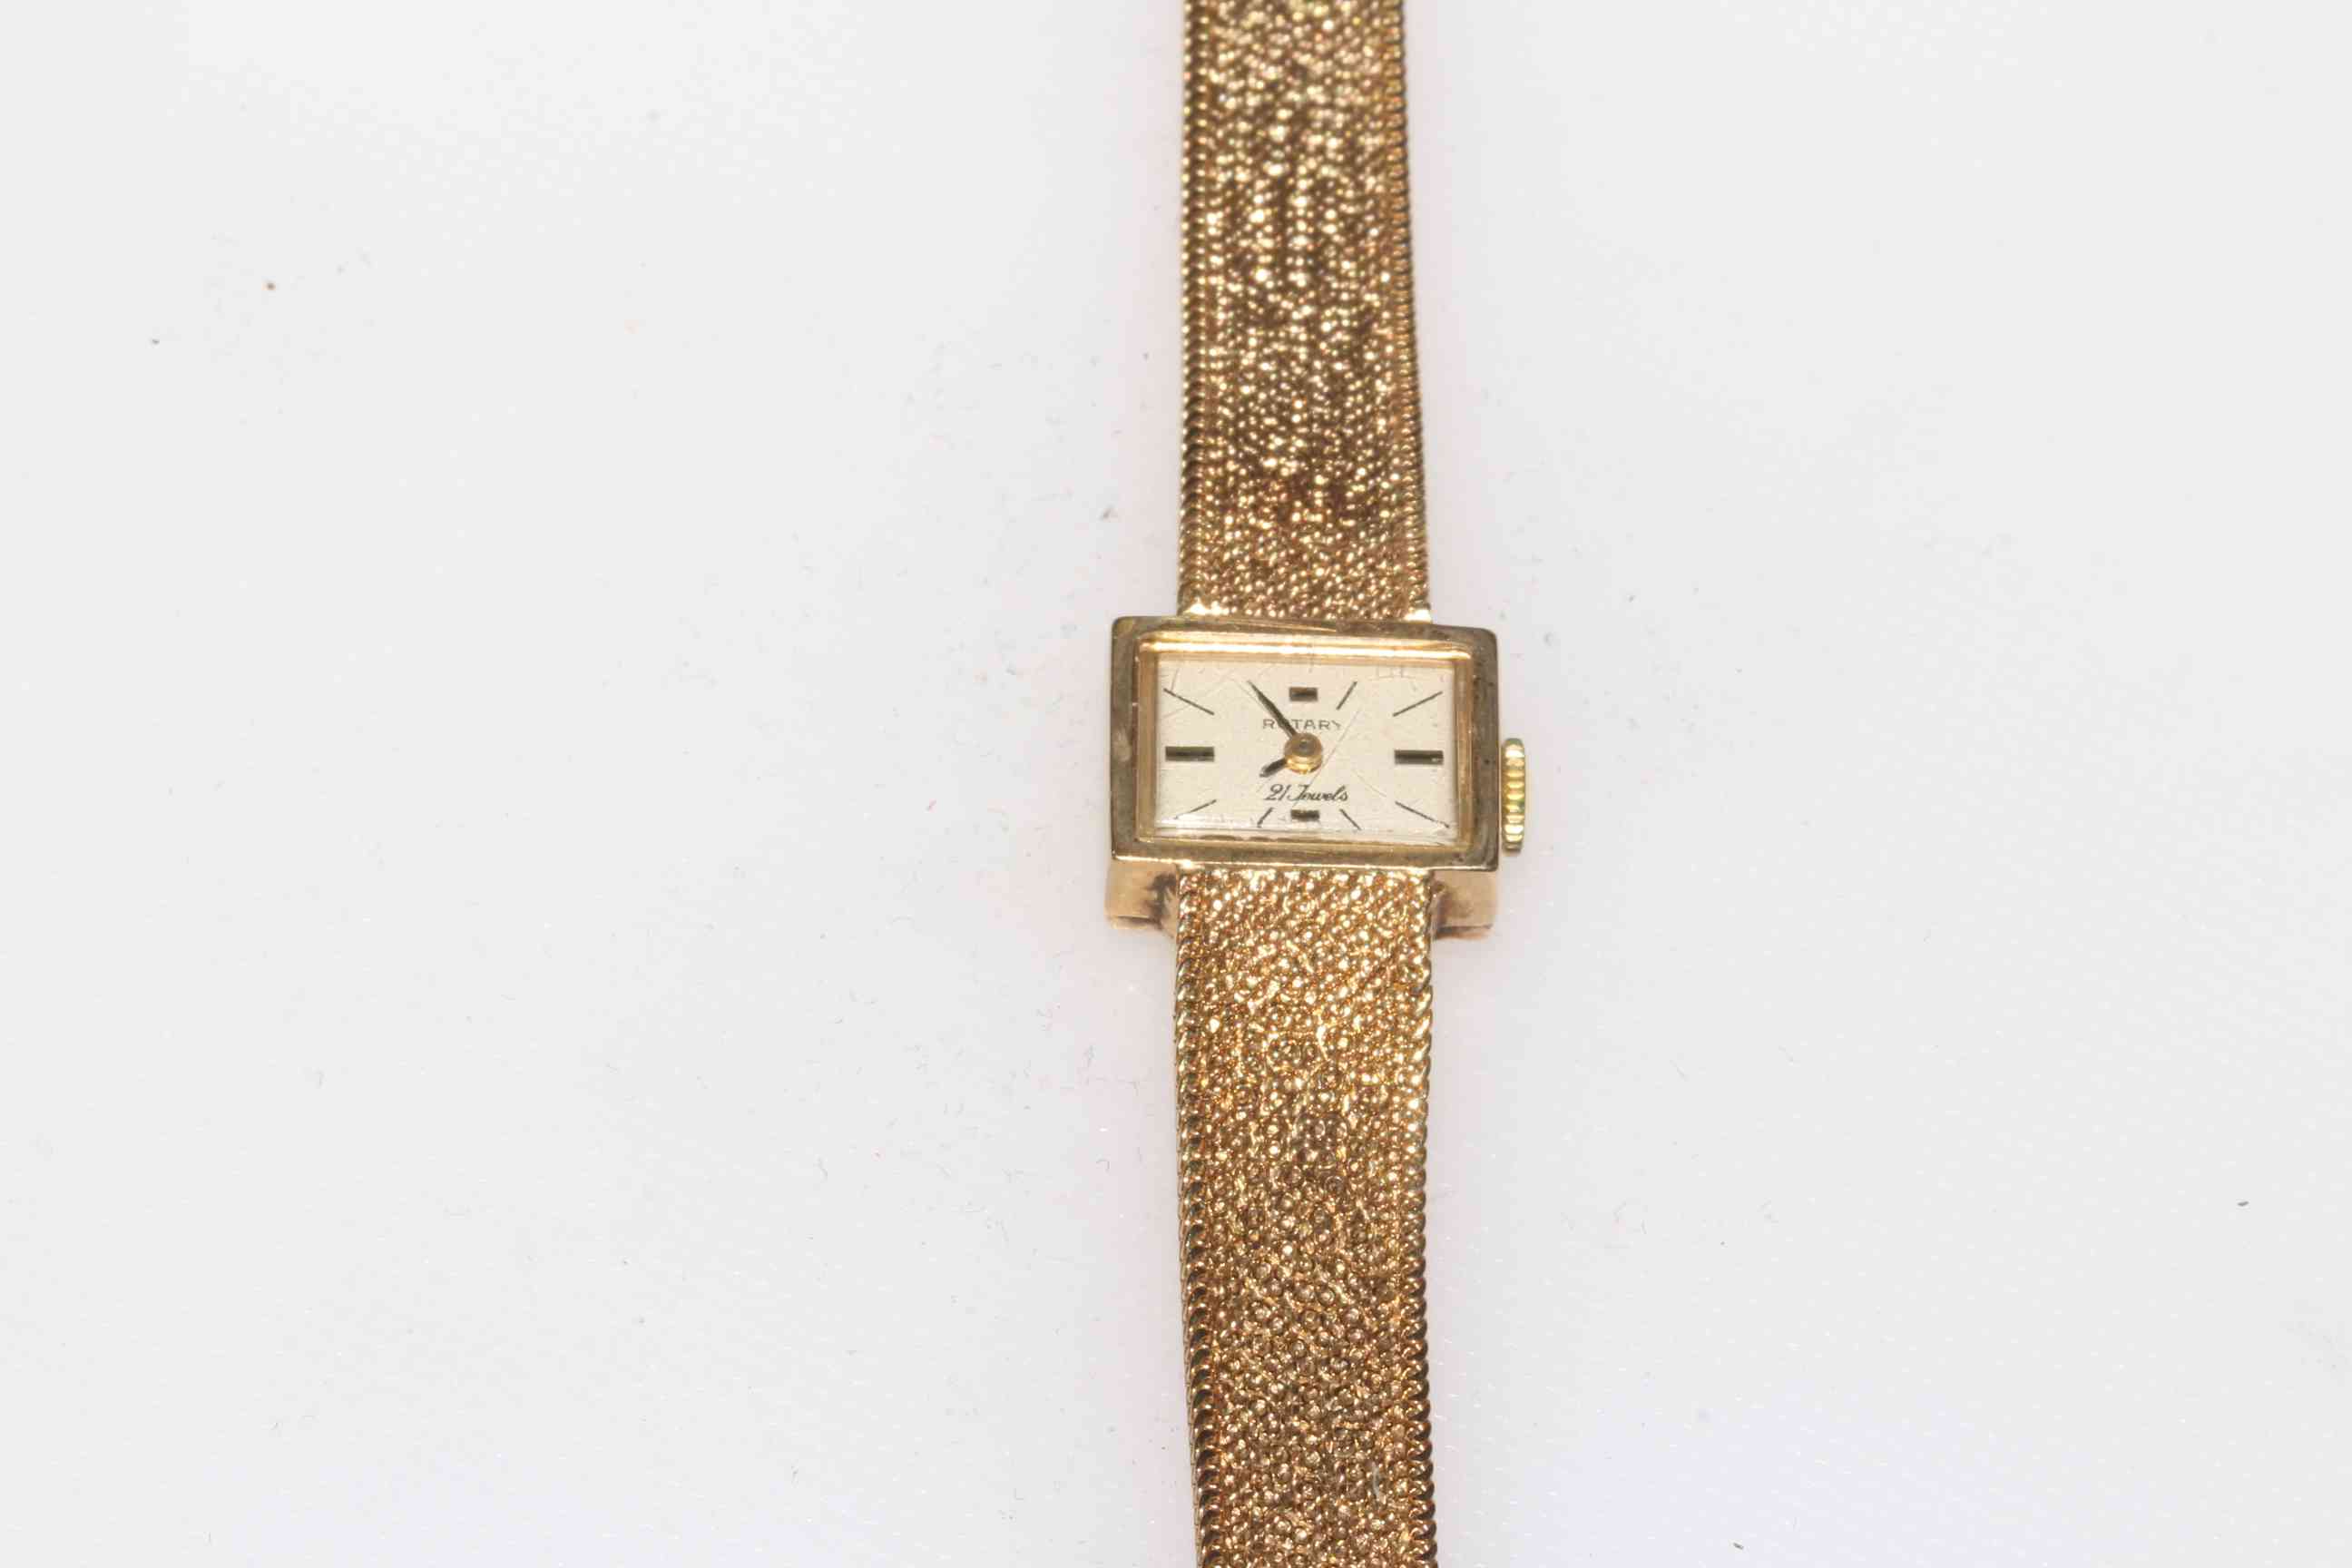 Rotary ladies 9 carat gold bracelet watch, face 11mm by 15mm.